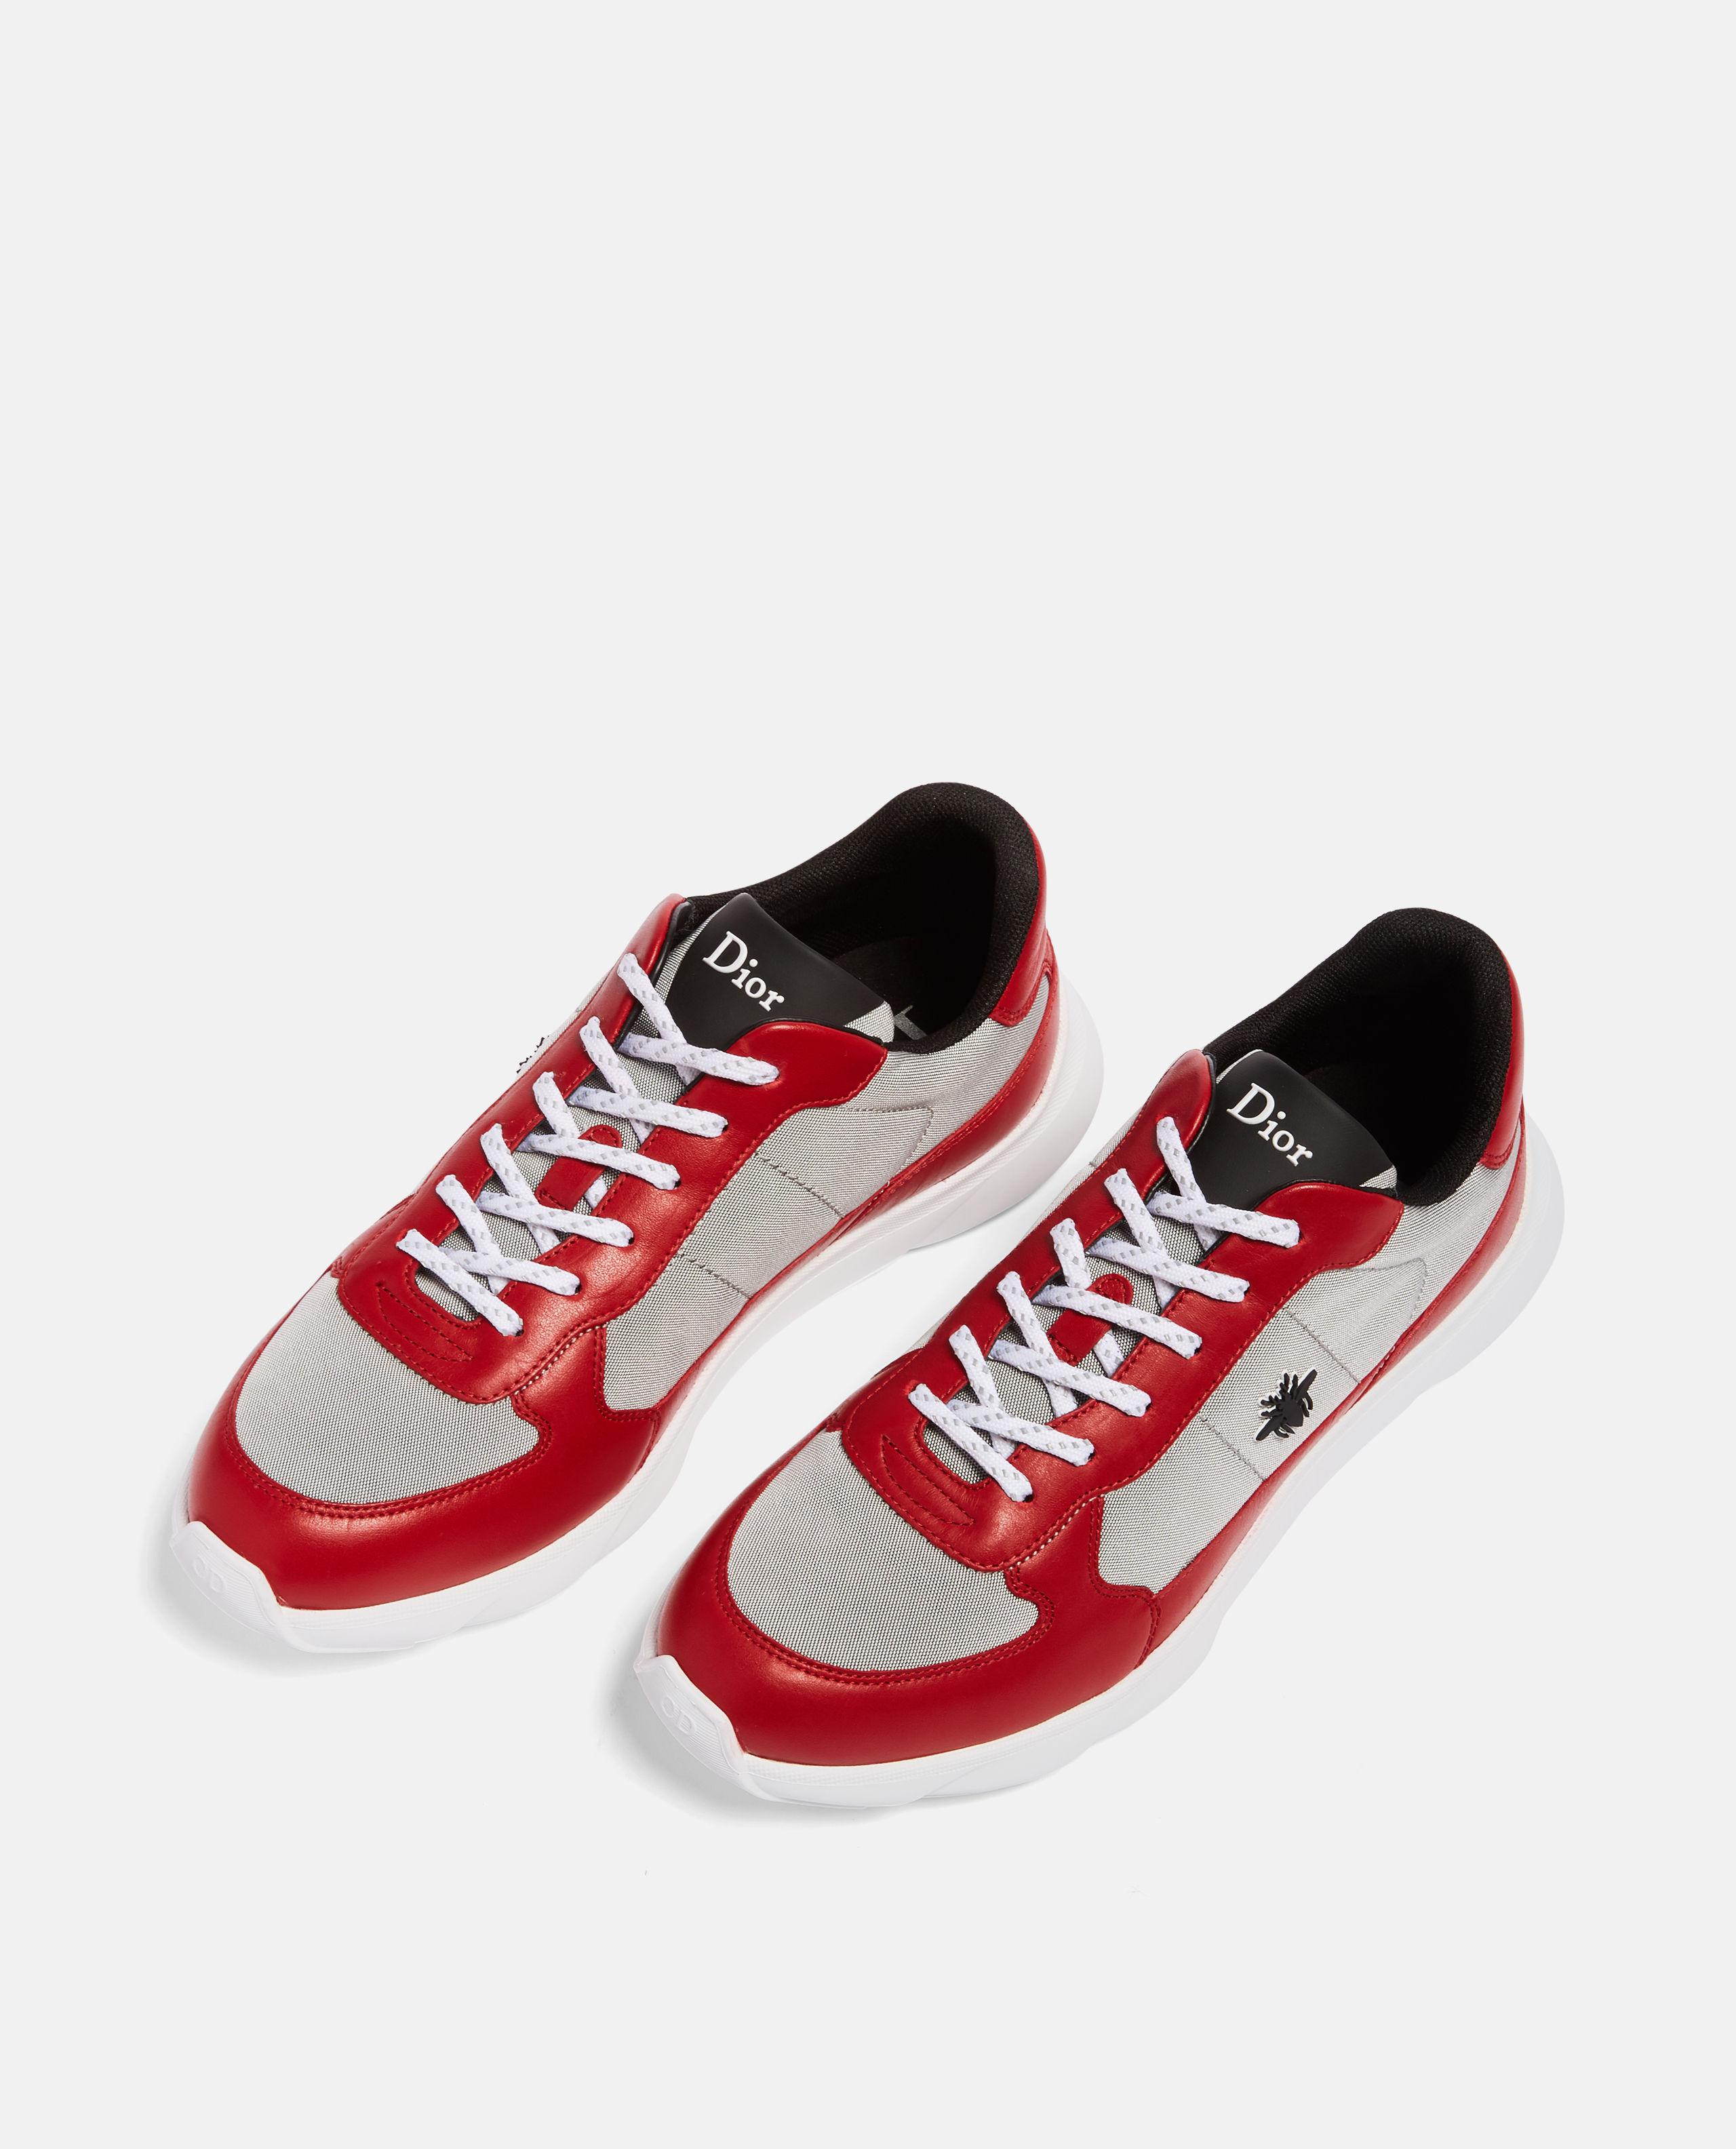 Dior Homme Leather Sneakers B21 Runners 